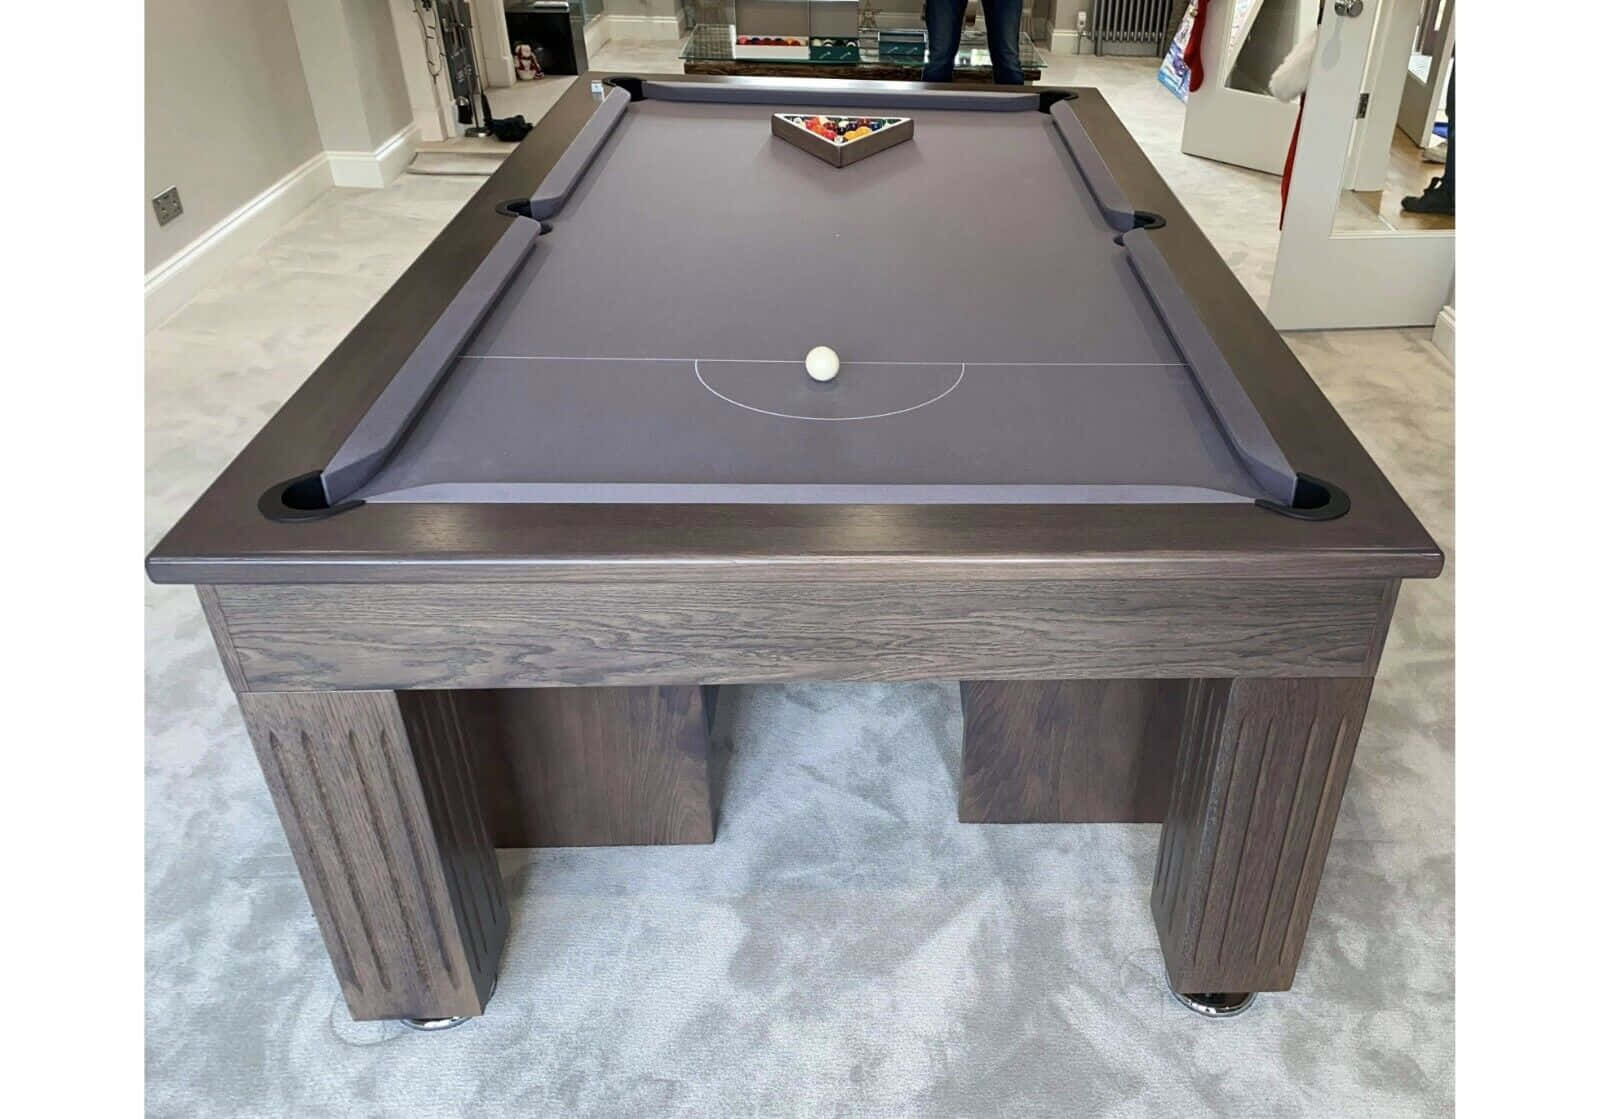 A Pool Table With A Grey Cloth And A Black Ball